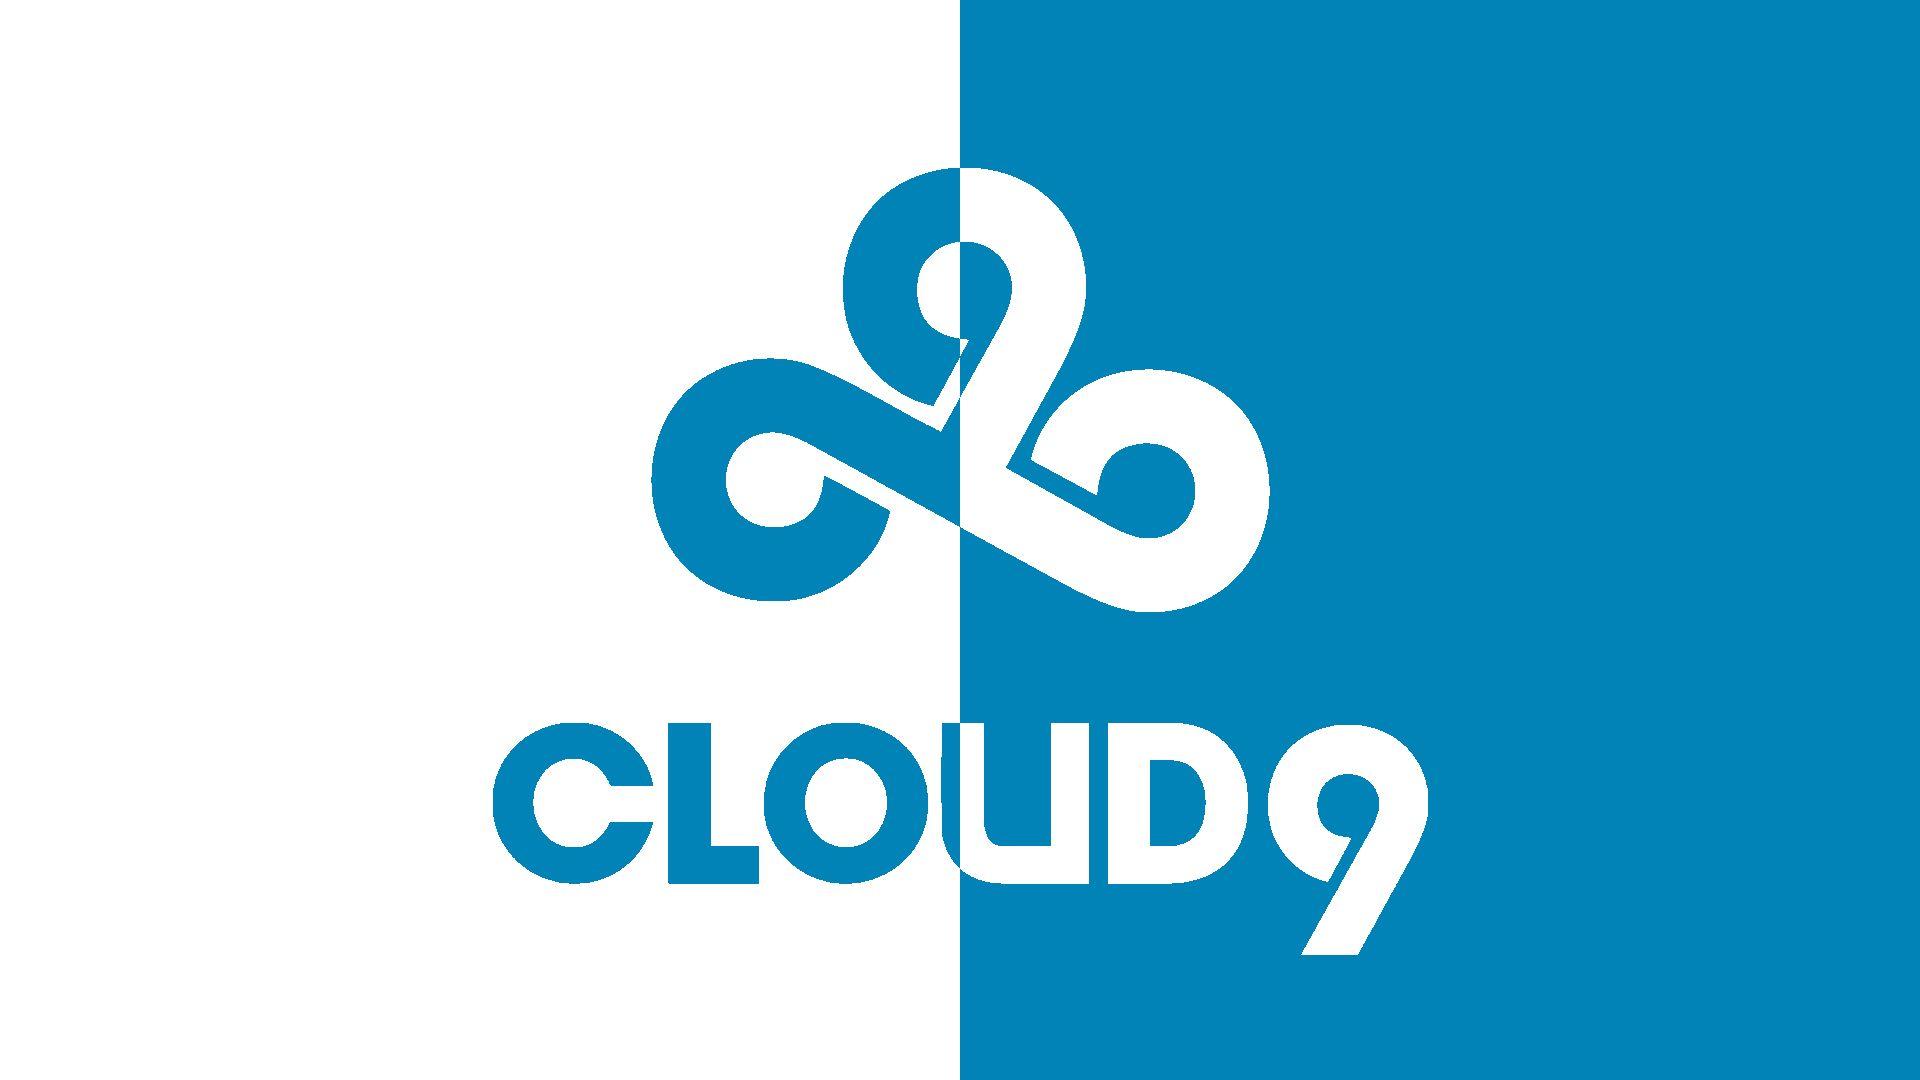 C9 Logo - Made myself a C9 wallpaper like the NiP one posted earlier #games ...